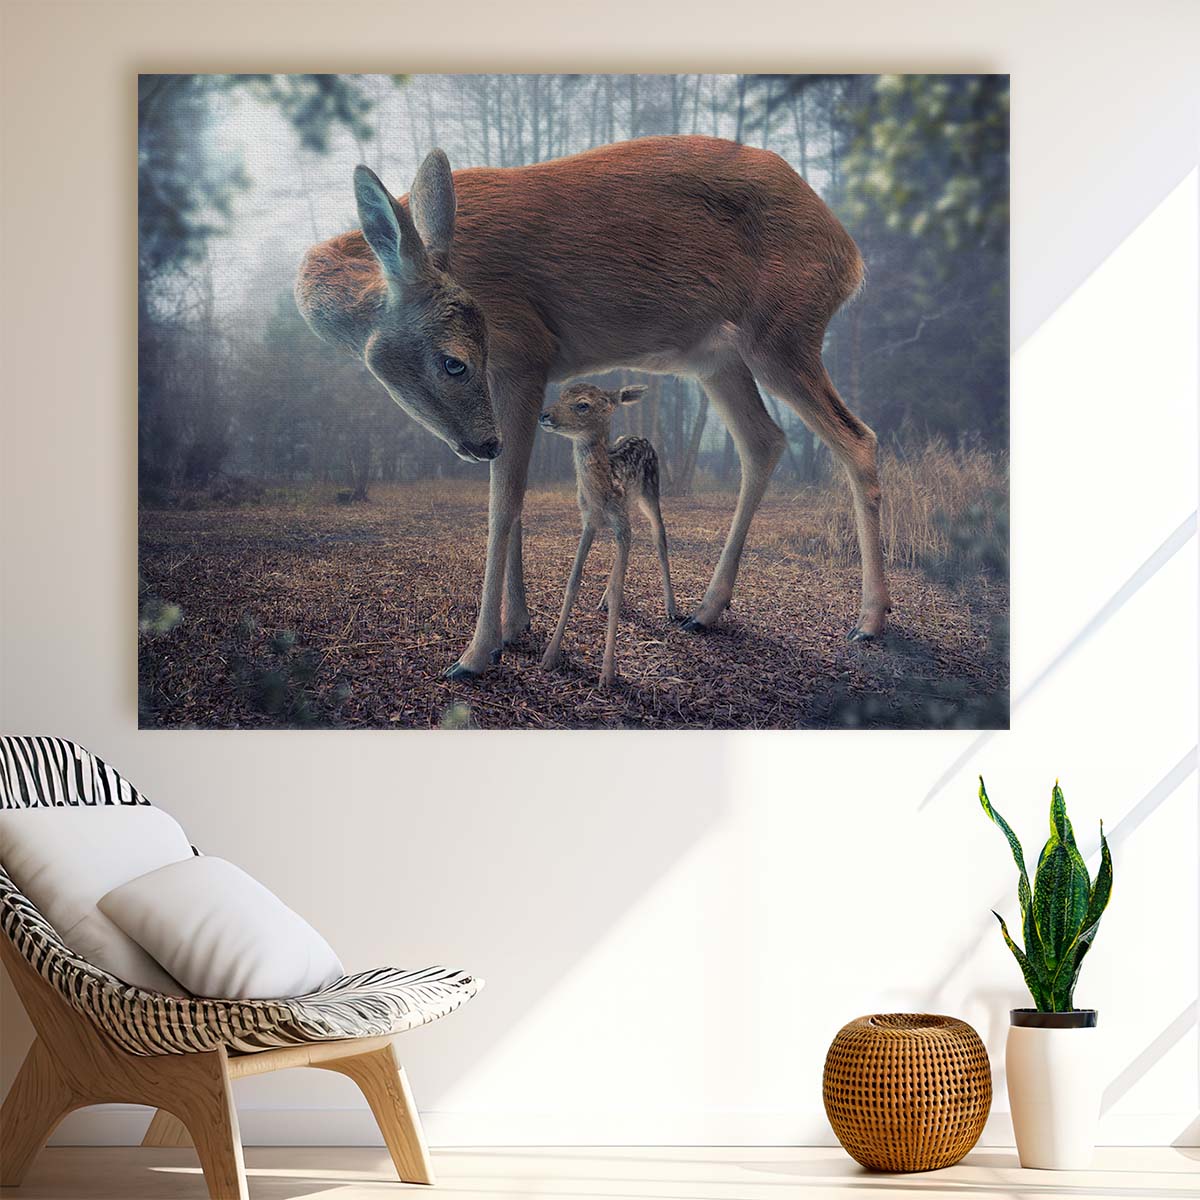 Surreal MotherBaby Deer Fantasy Forest Wall Art by Luxuriance Designs. Made in USA.